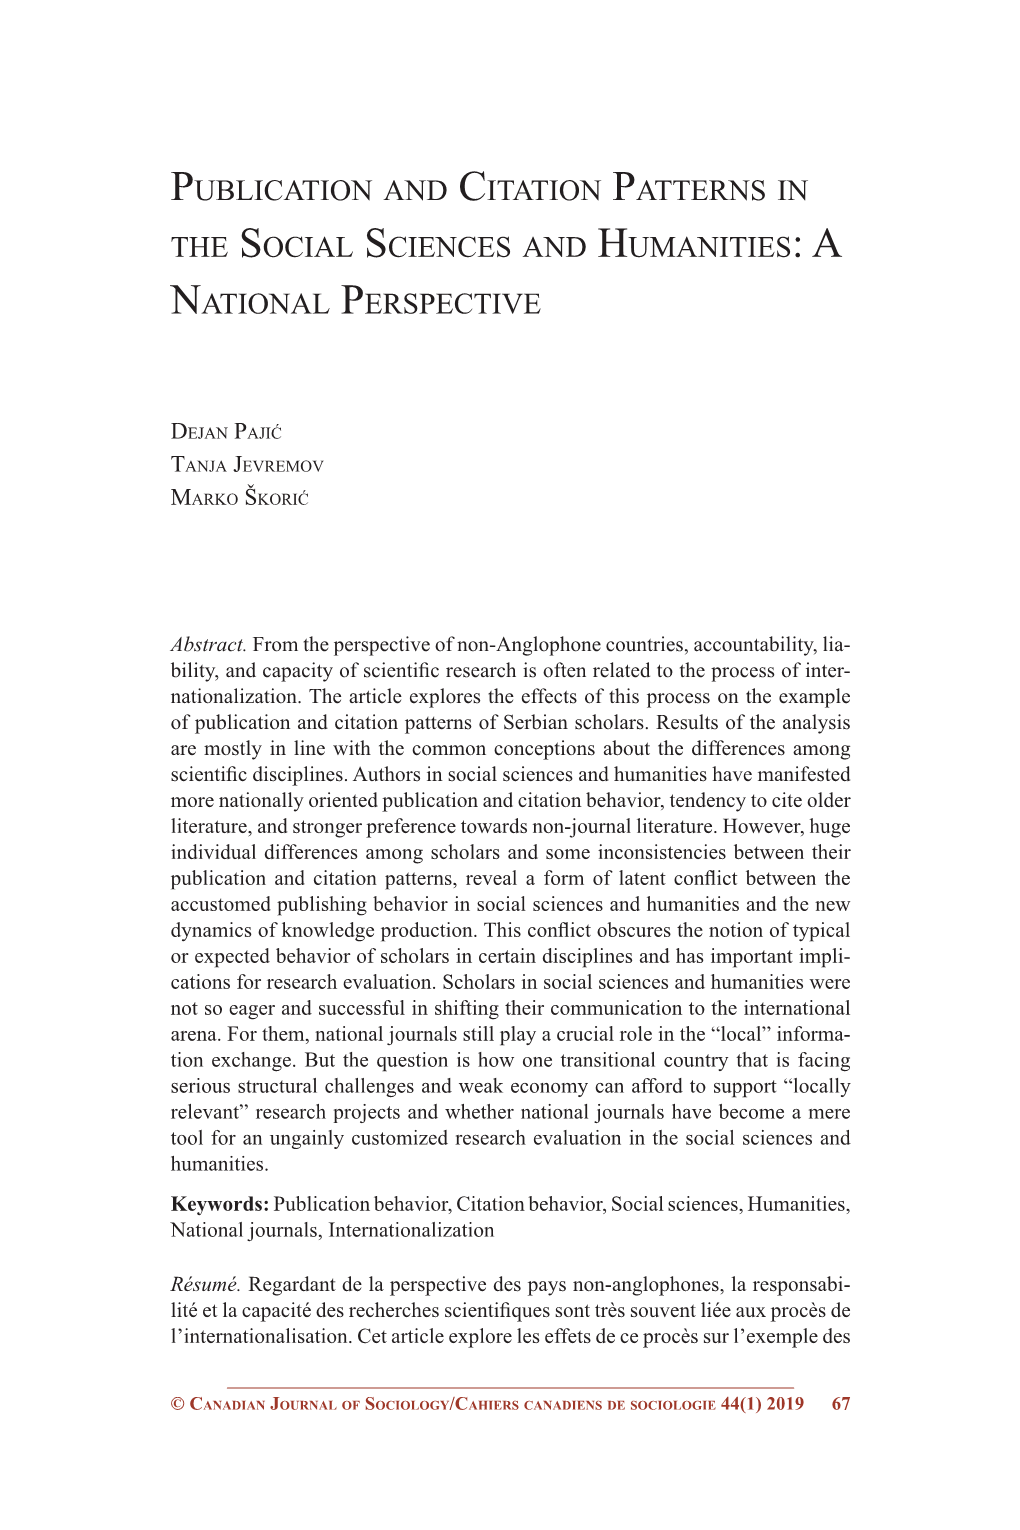 Publication and Citation Patterns in the Social Sciences and Humanities: a National Perspective